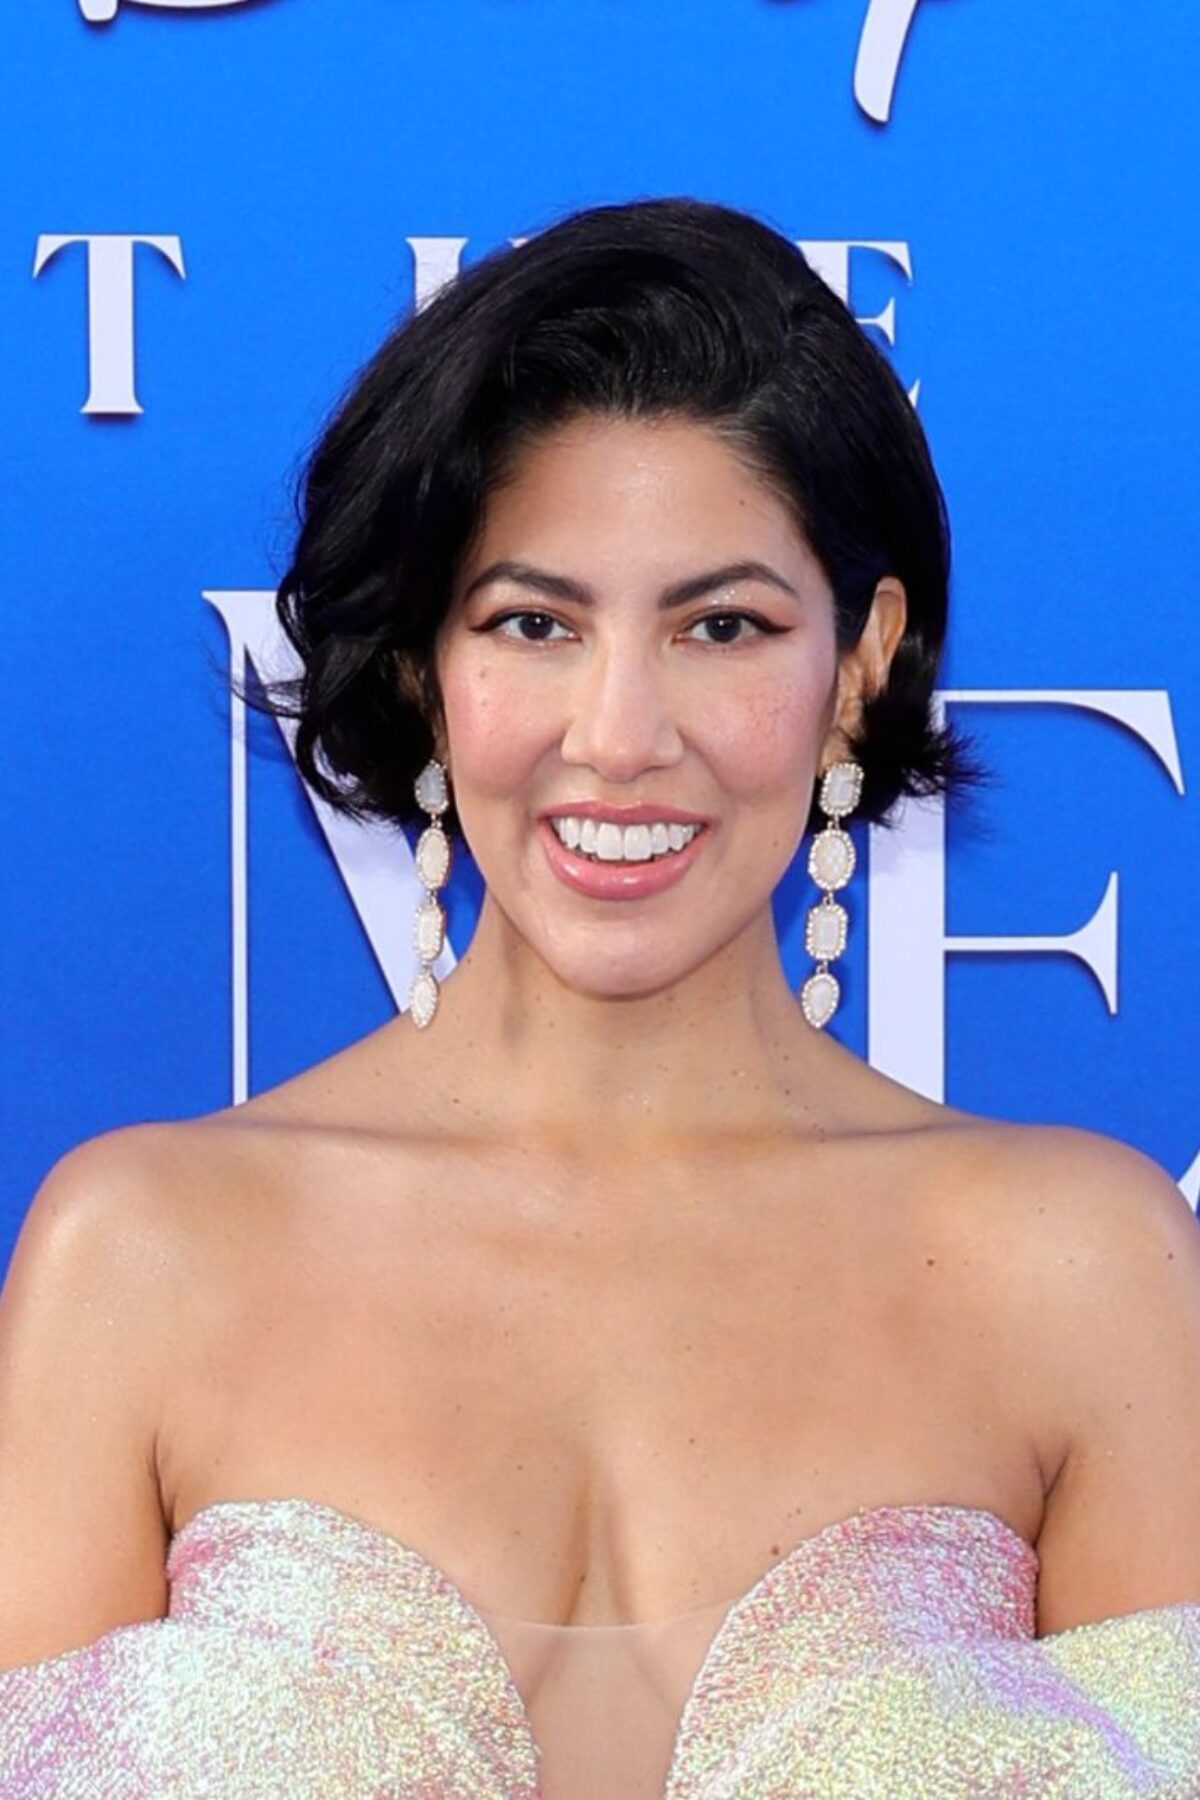 HOLLYWOOD, CALIFORNIA - MAY 08: Stephanie Beatriz attends the world premiere of Disney's 